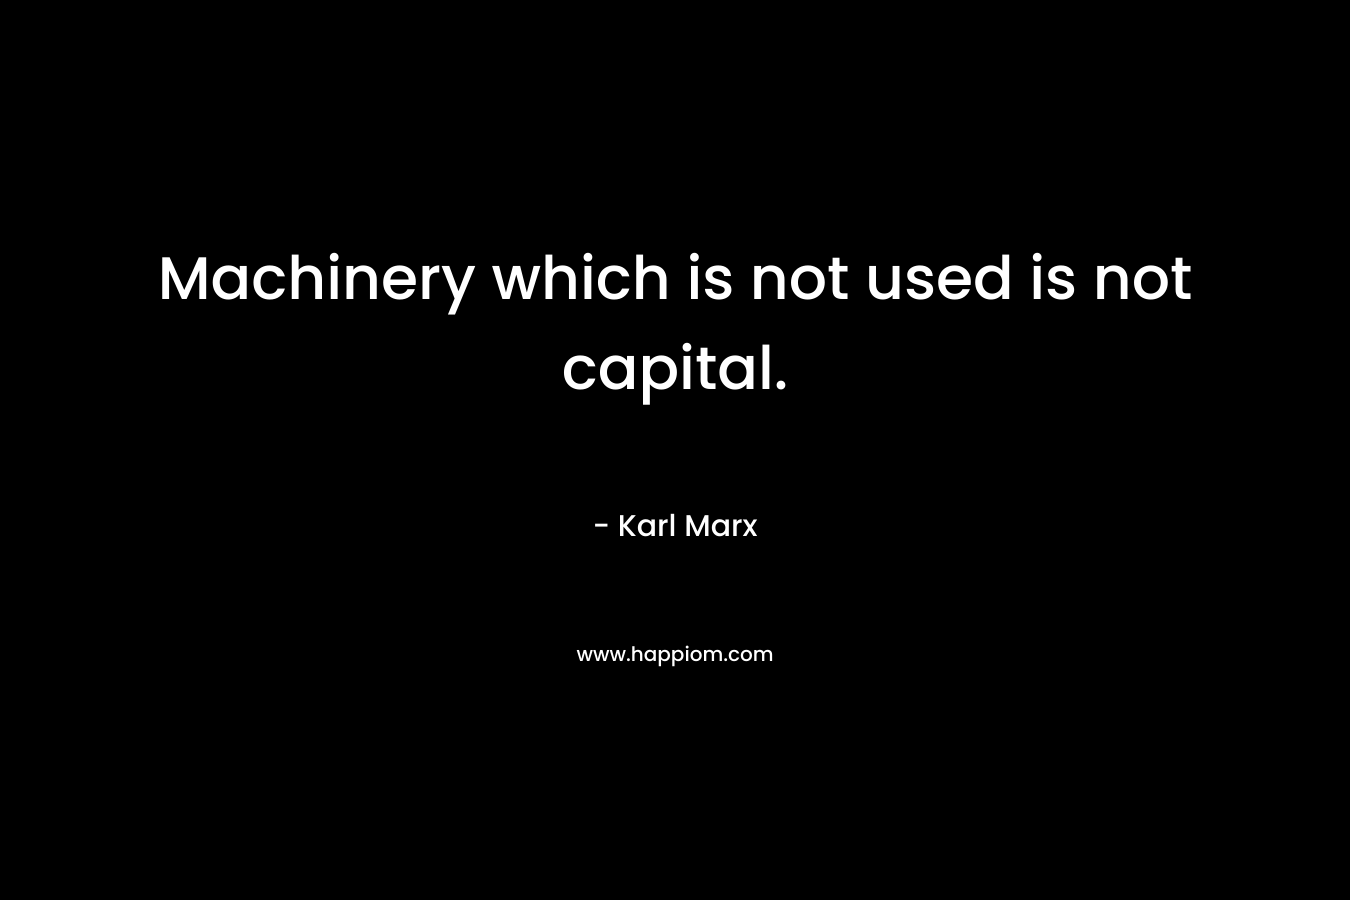 Machinery which is not used is not capital. – Karl Marx